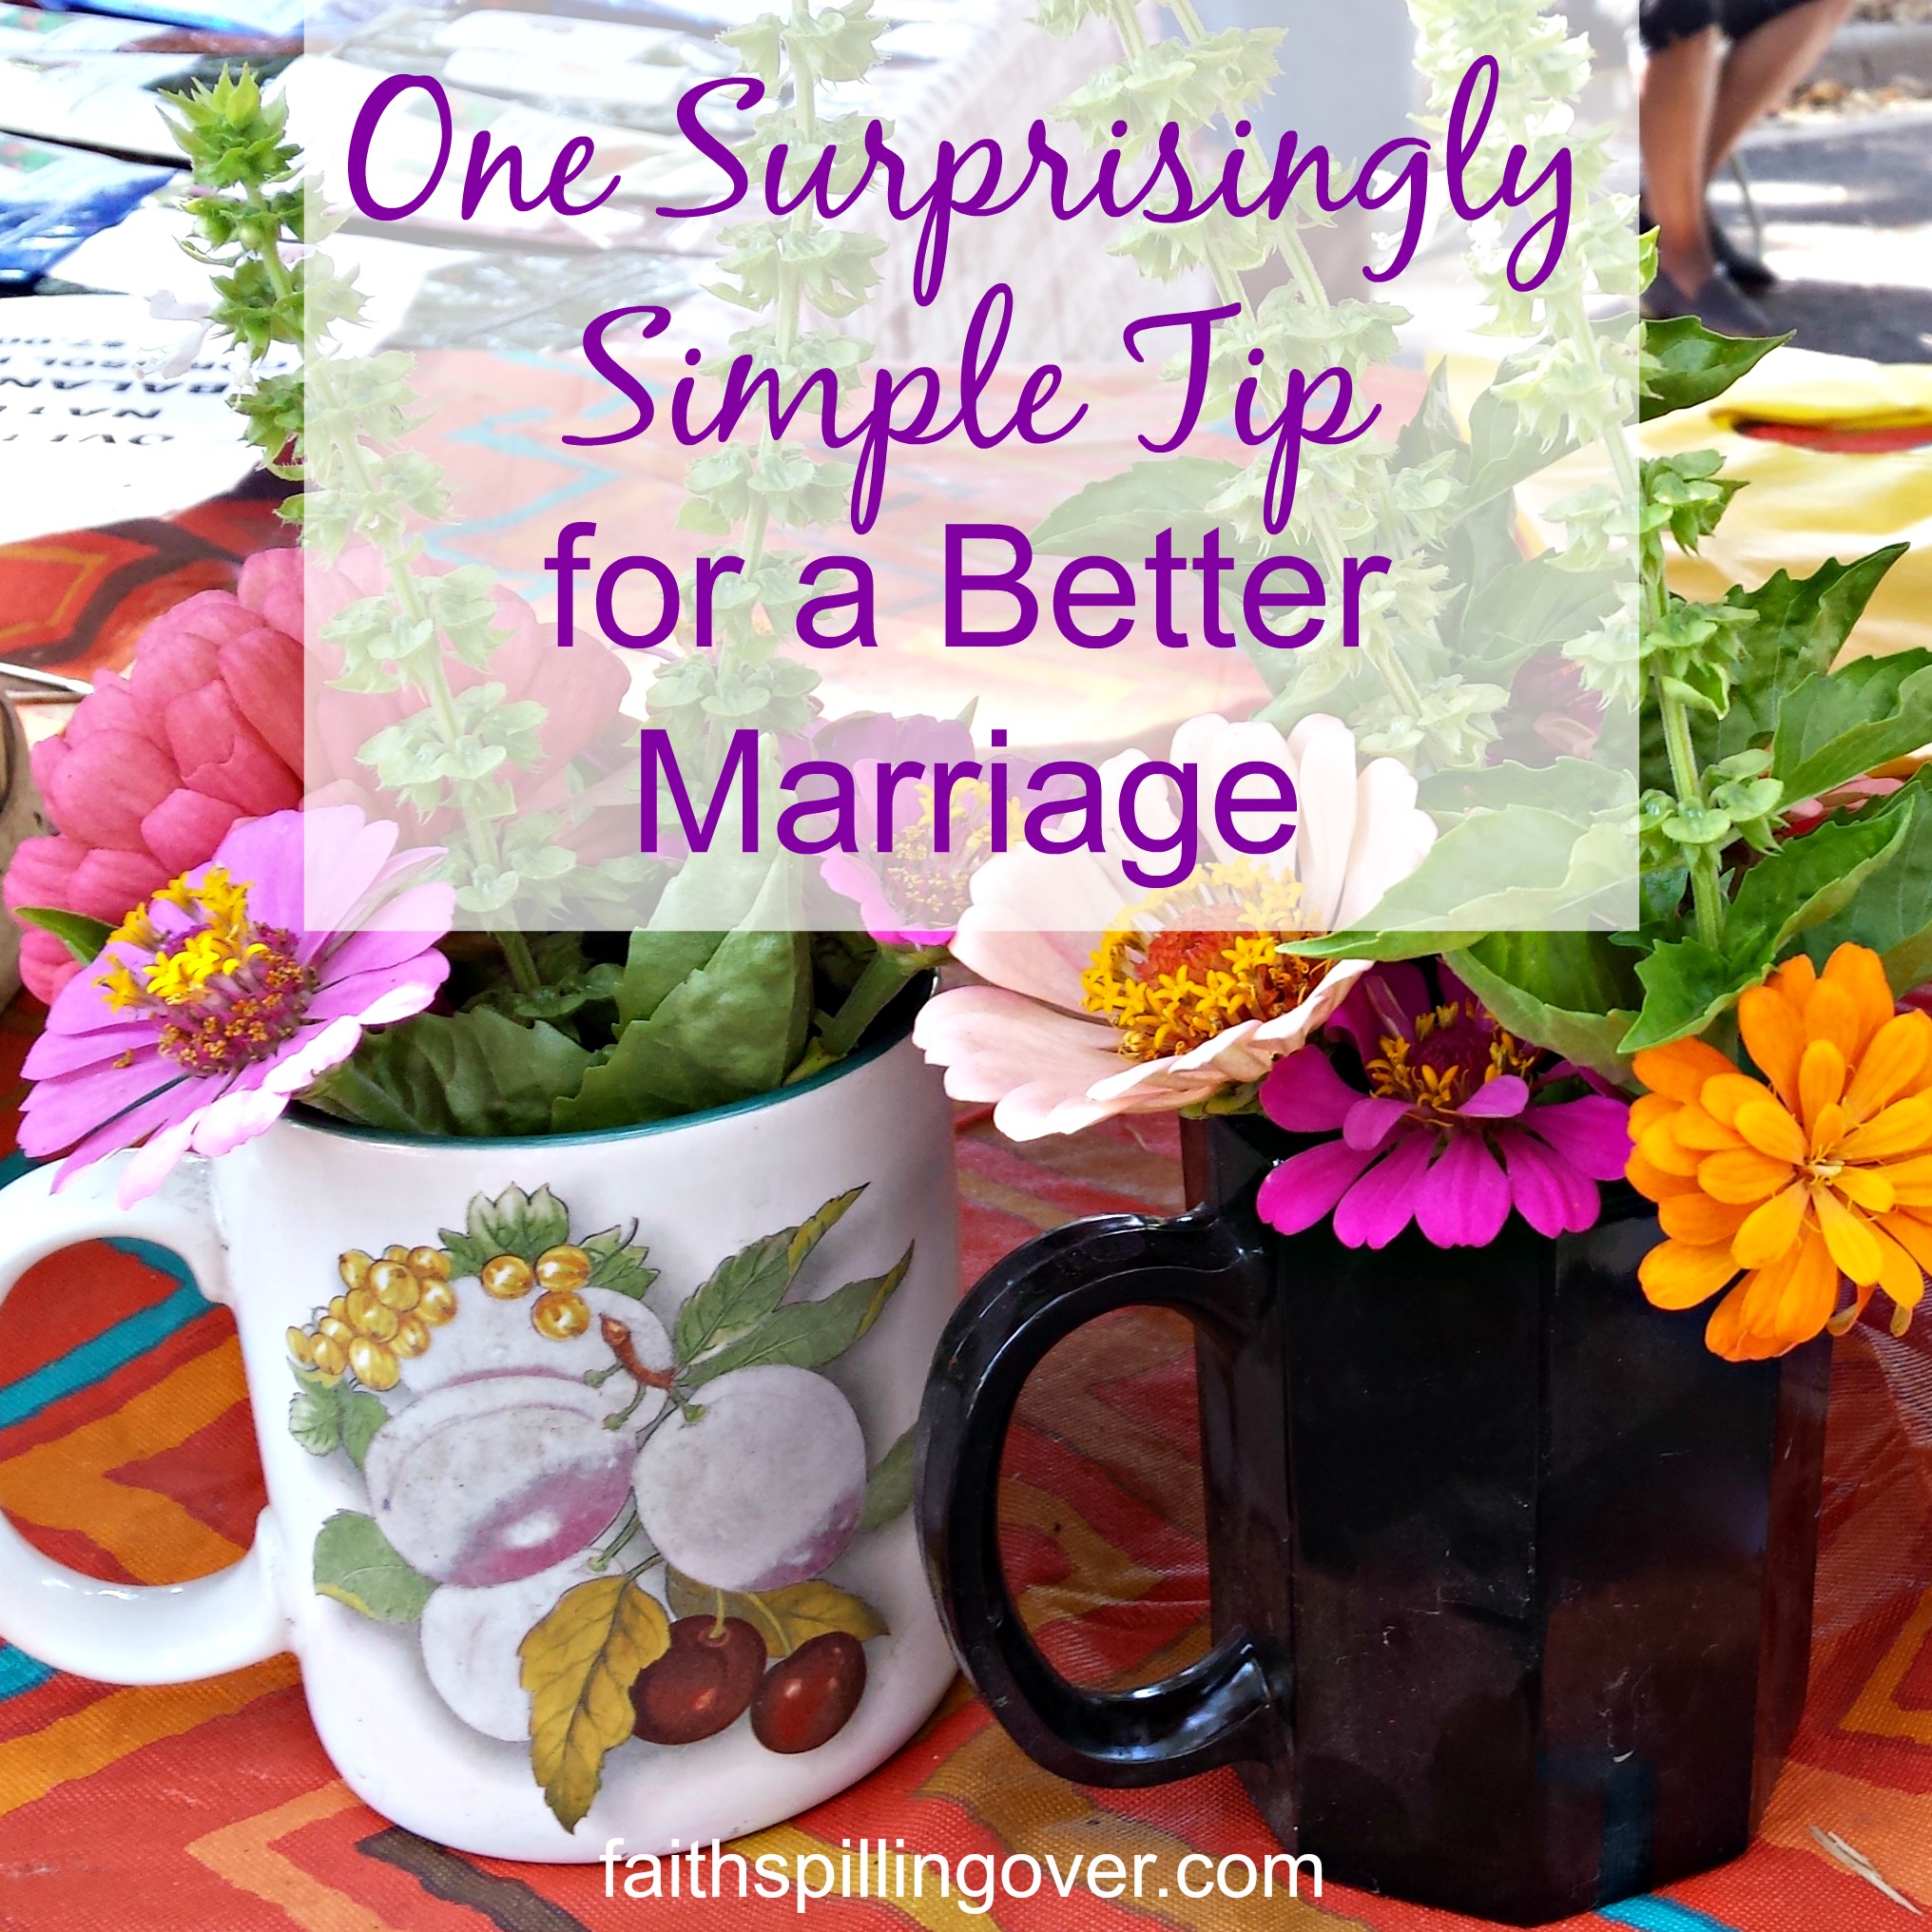 One surprisingly simple tip that you can try for one week for a better marriage.